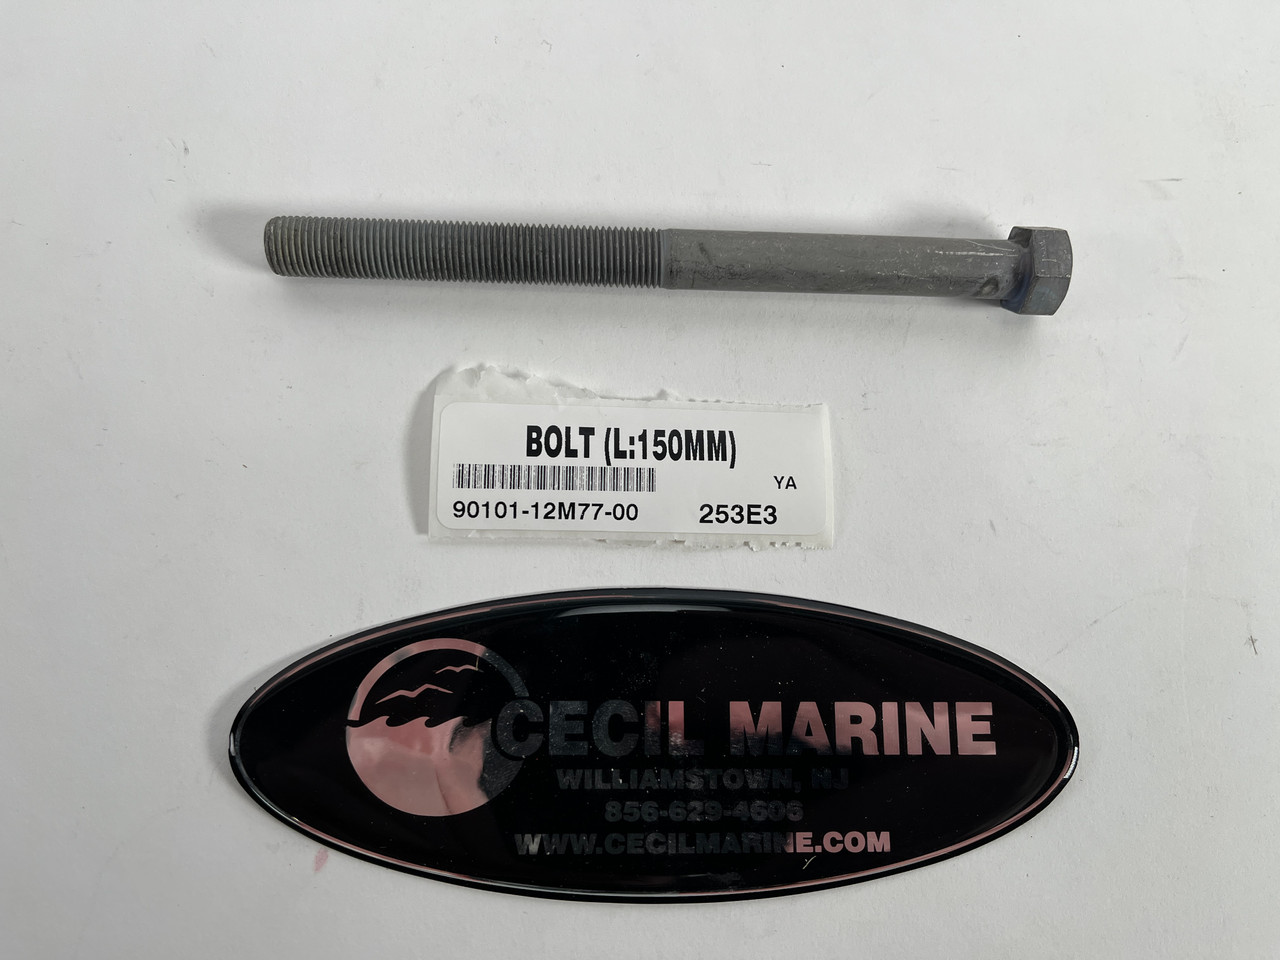 $27.99* GENUINE YAMAHA no tax* BOLT (L:150MM) 90101-12M77-00 *In Stock & Ready To Ship